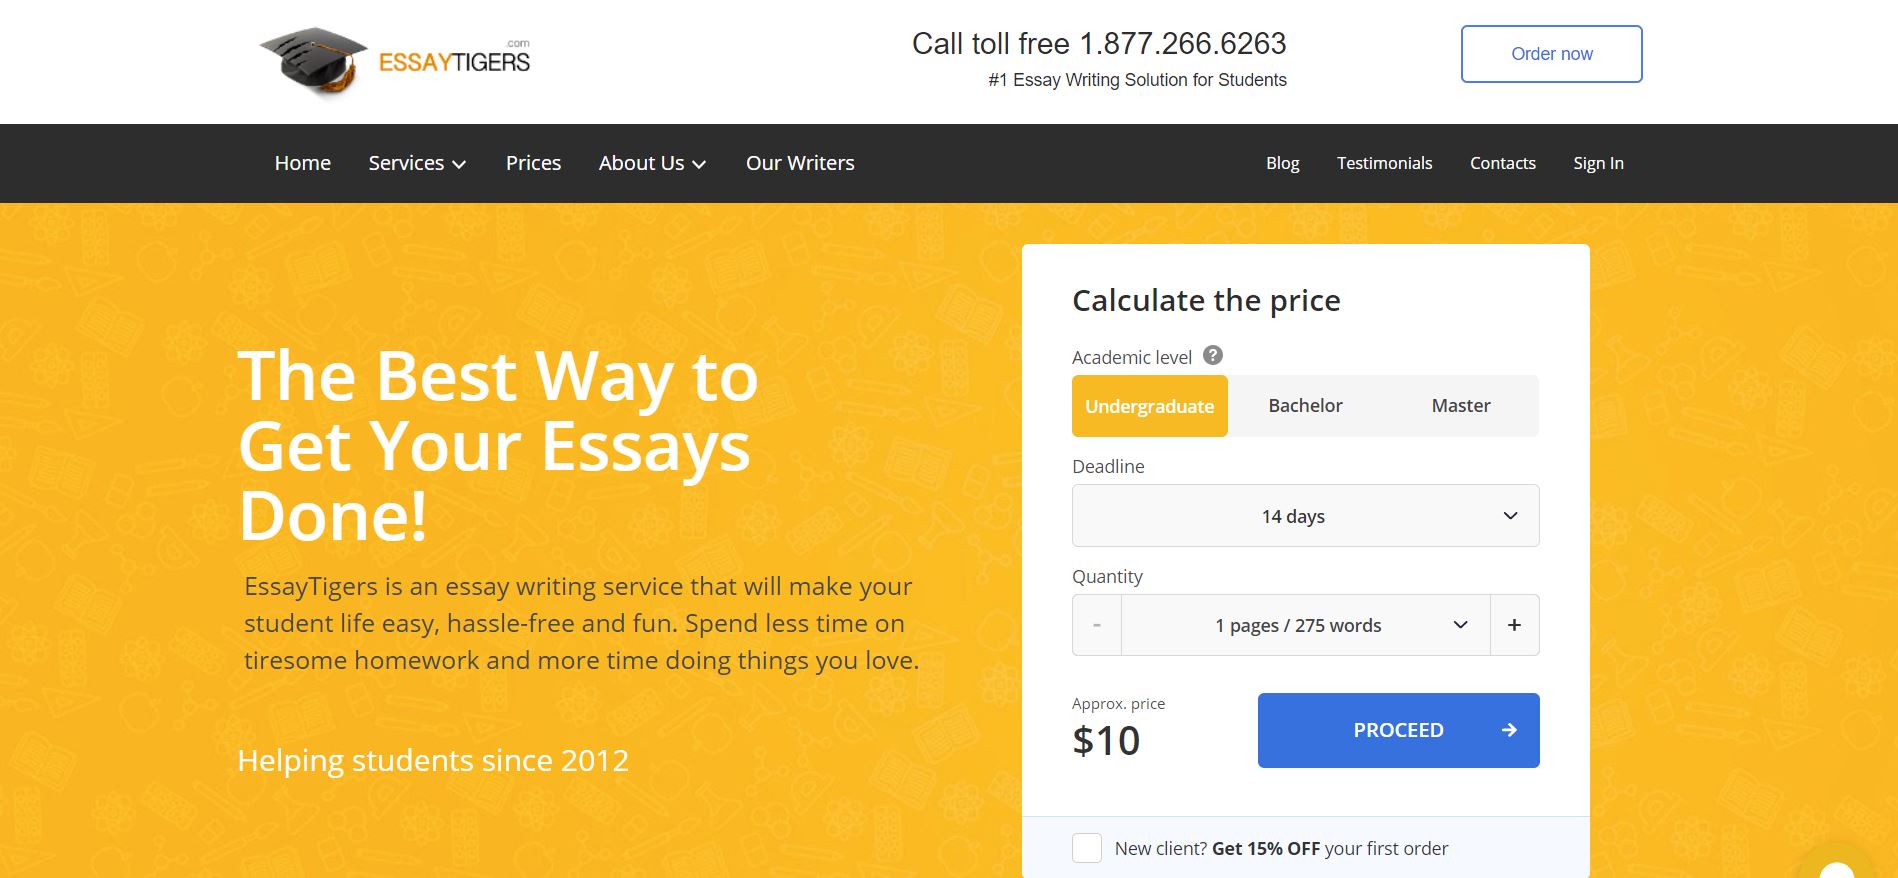 essay tigers review